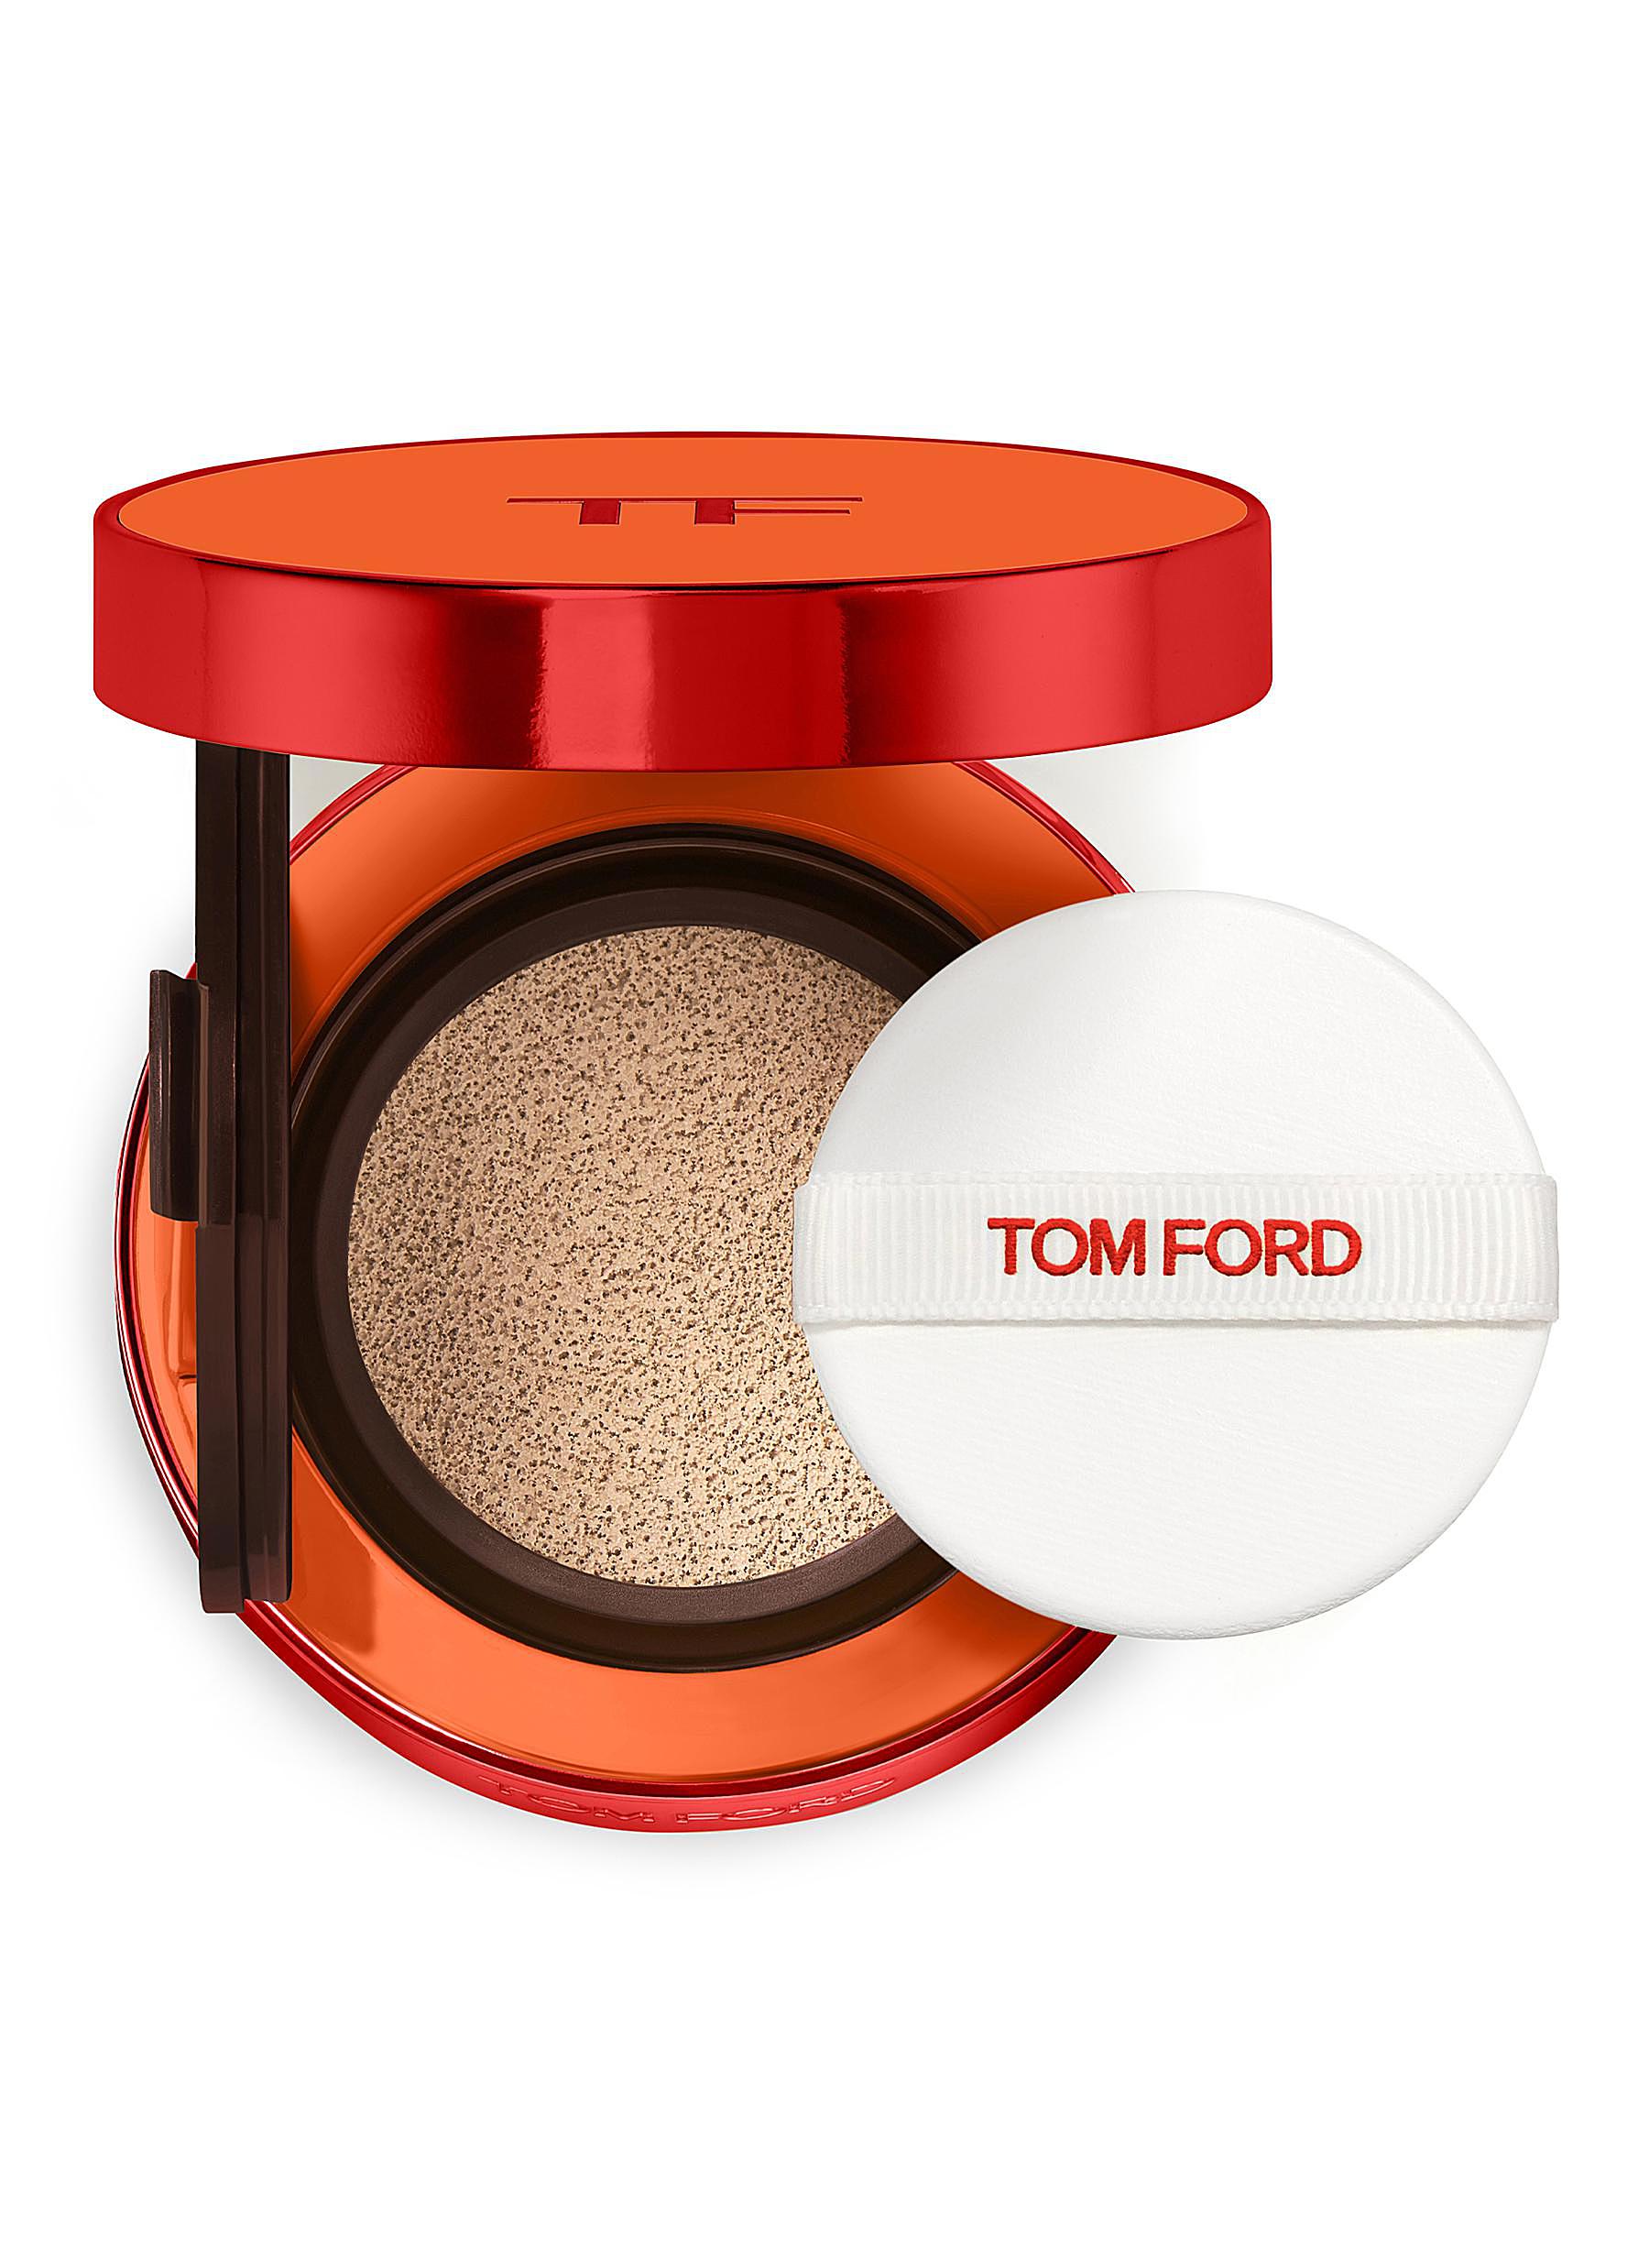 TOM FORD BEAUTY | Bitter Peach Cushion Compact Case | Beauty | Lane Crawford